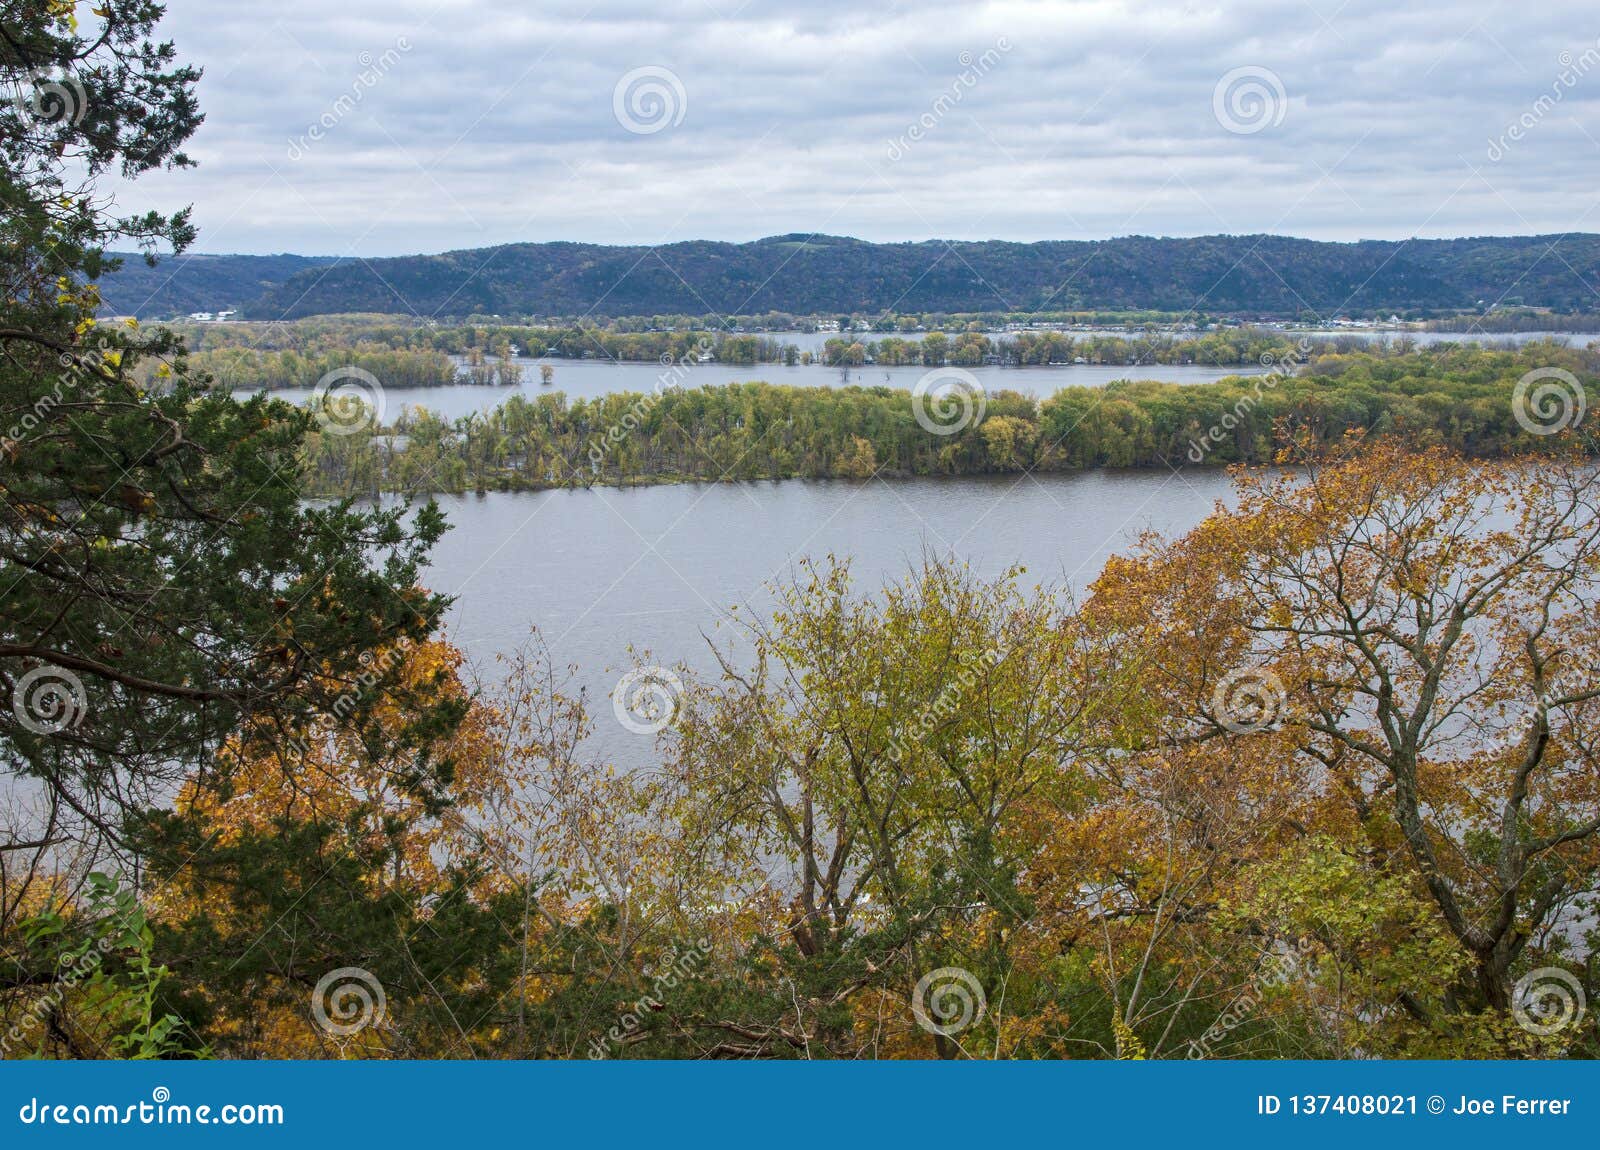 overlooking mississippi river from effigy mounds